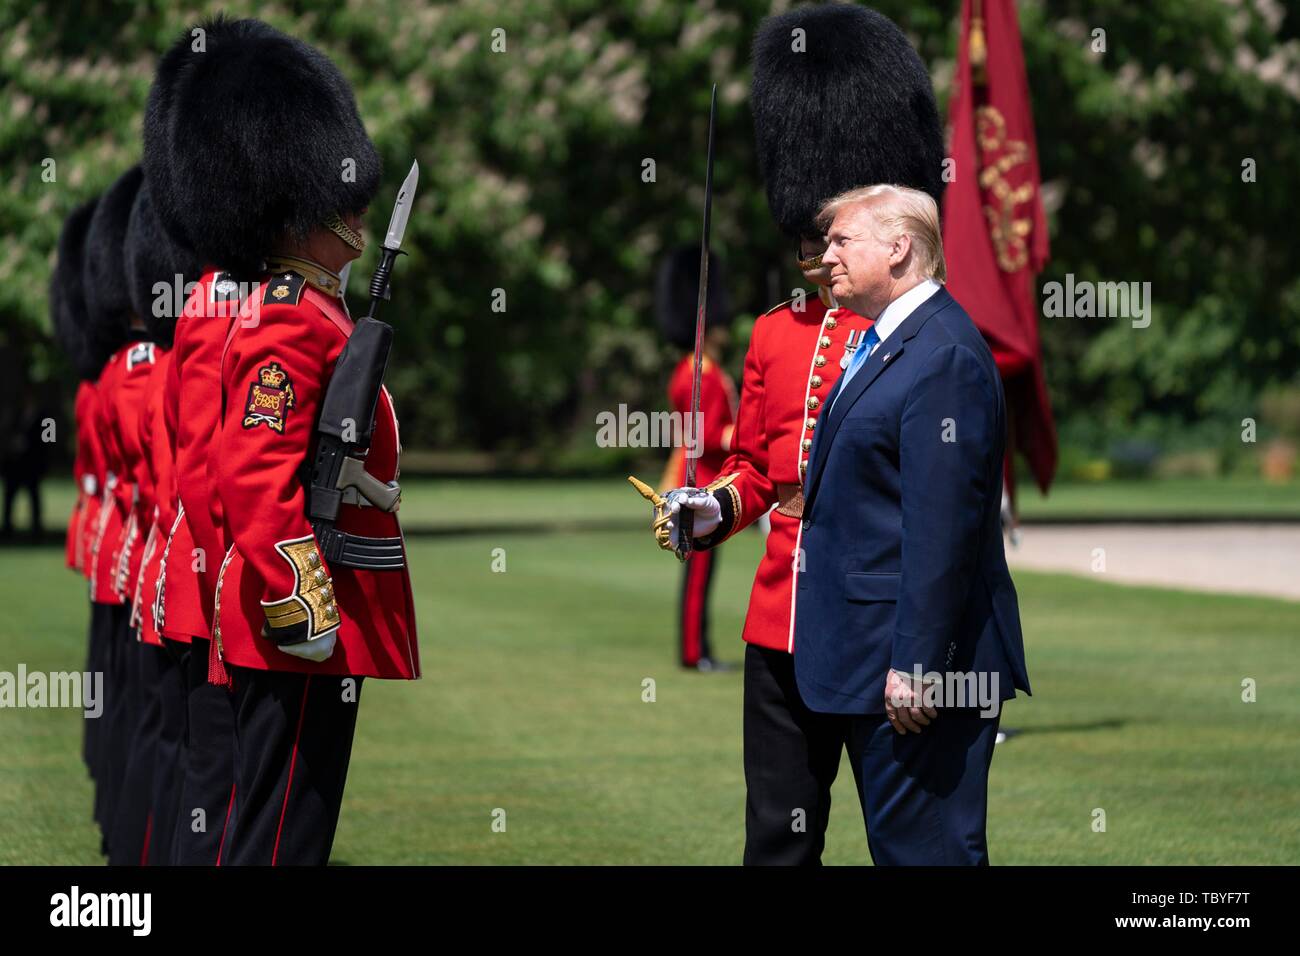 London, UK. 03rd June, 2019. U.S President Donald Trump smiles as he inspects the Queens Guard during an official welcome ceremony at Buckingham Palace June 3, 2019 in London, England. Credit: Planetpix/Alamy Live News Stock Photo